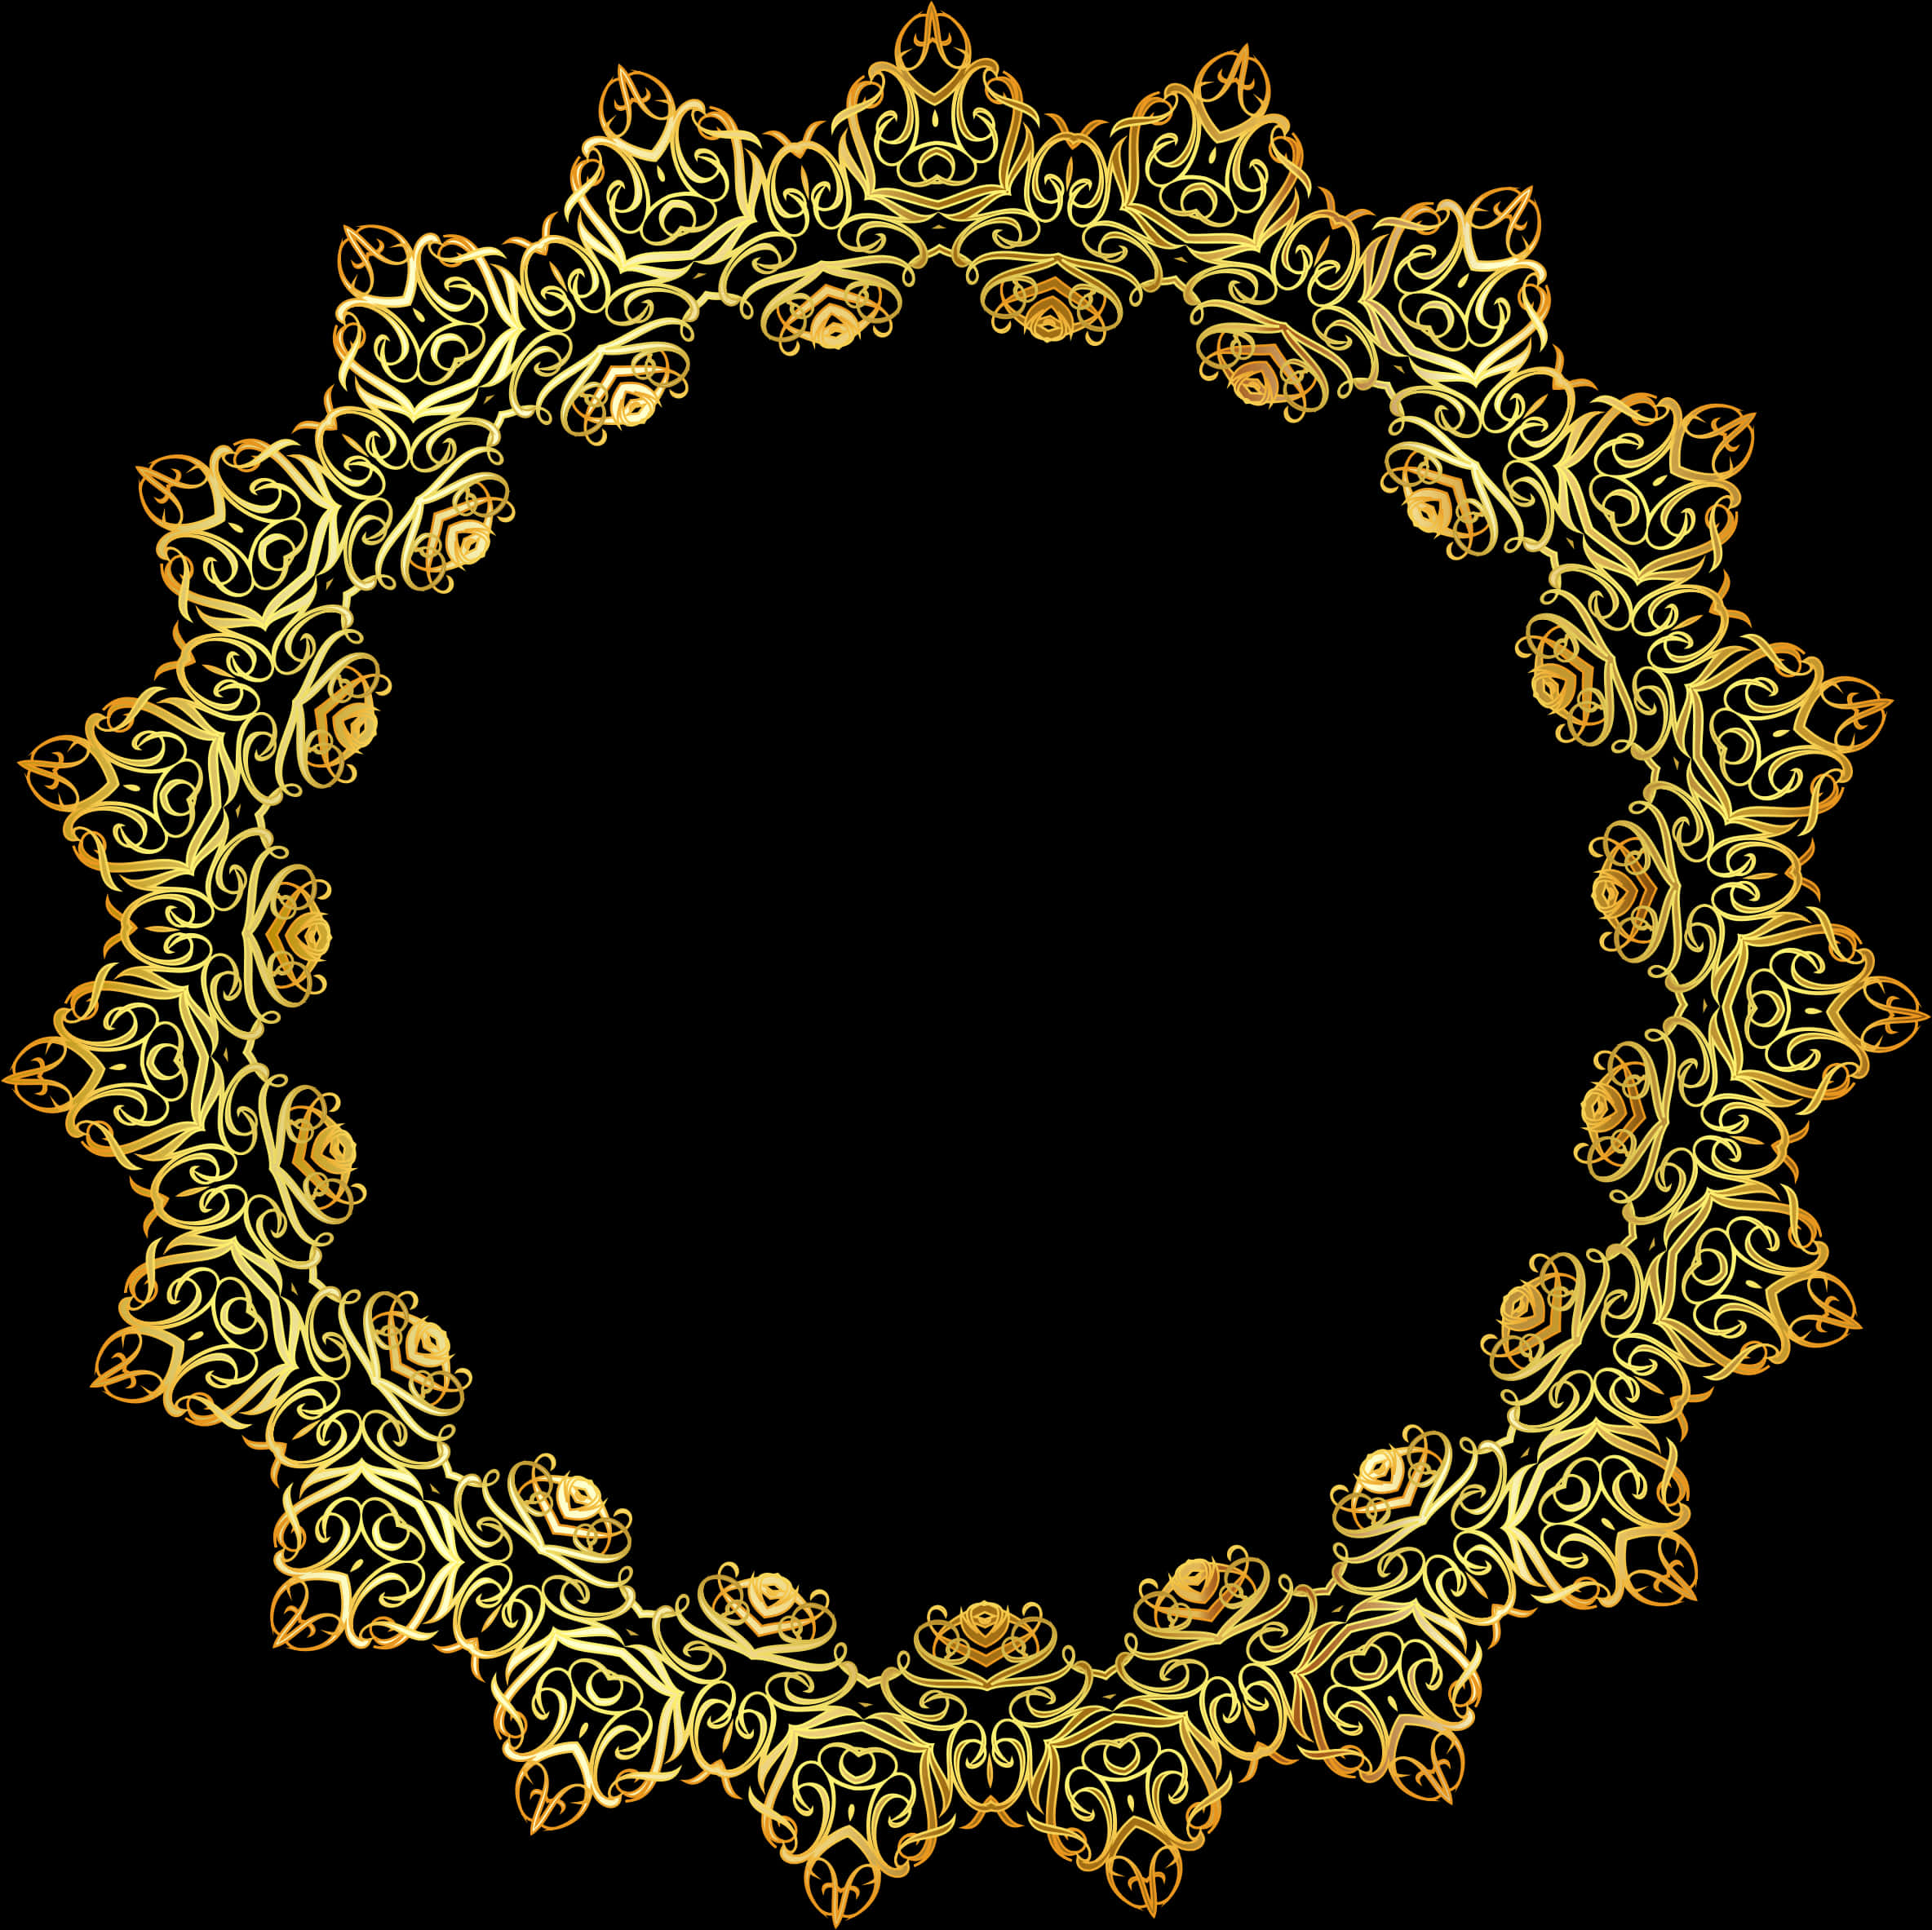 A Gold Circular Pattern On A Black Background